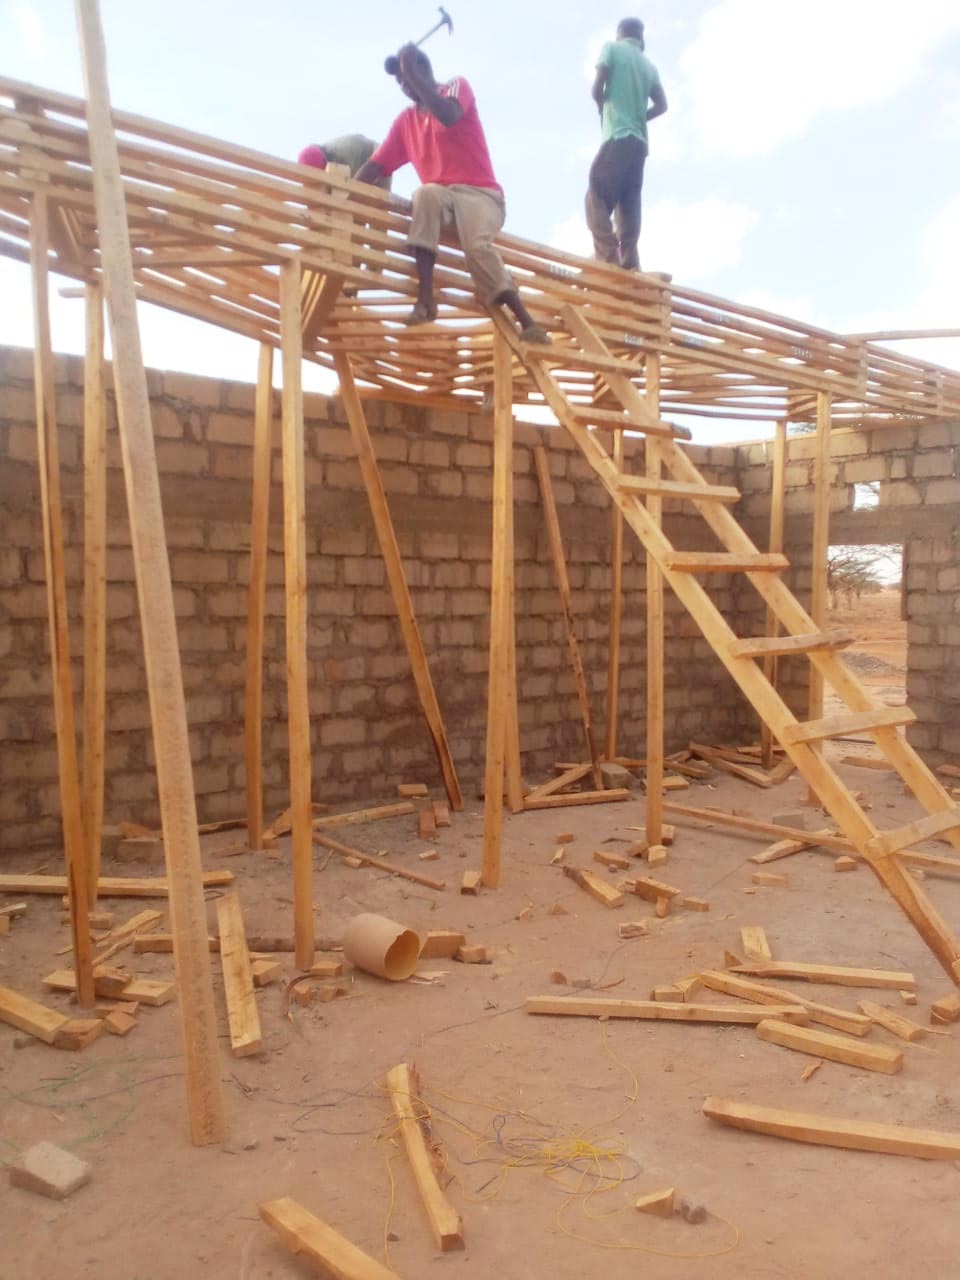 The roof structure for the classrooms is getting ready.